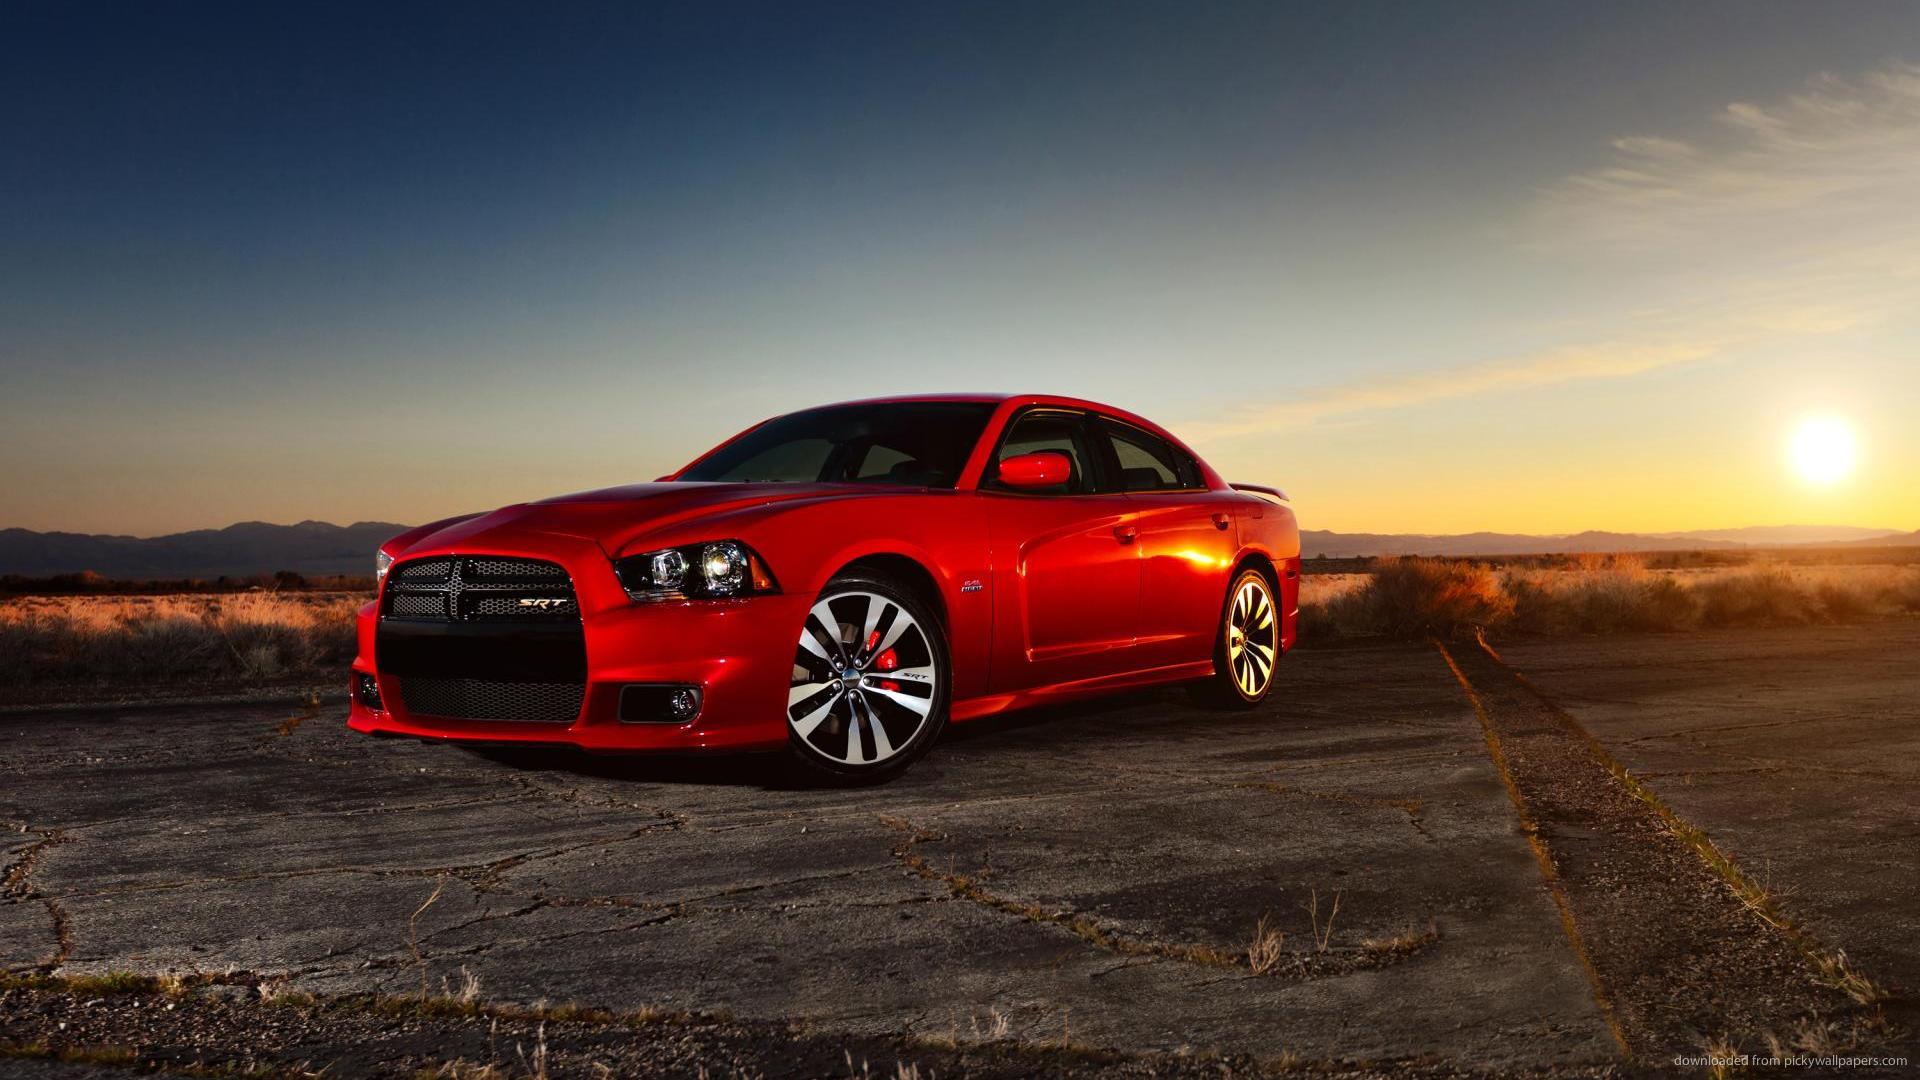 Red Dodge Charger SRT8 Wallpaper Picture For iPhone Blackberry iPad